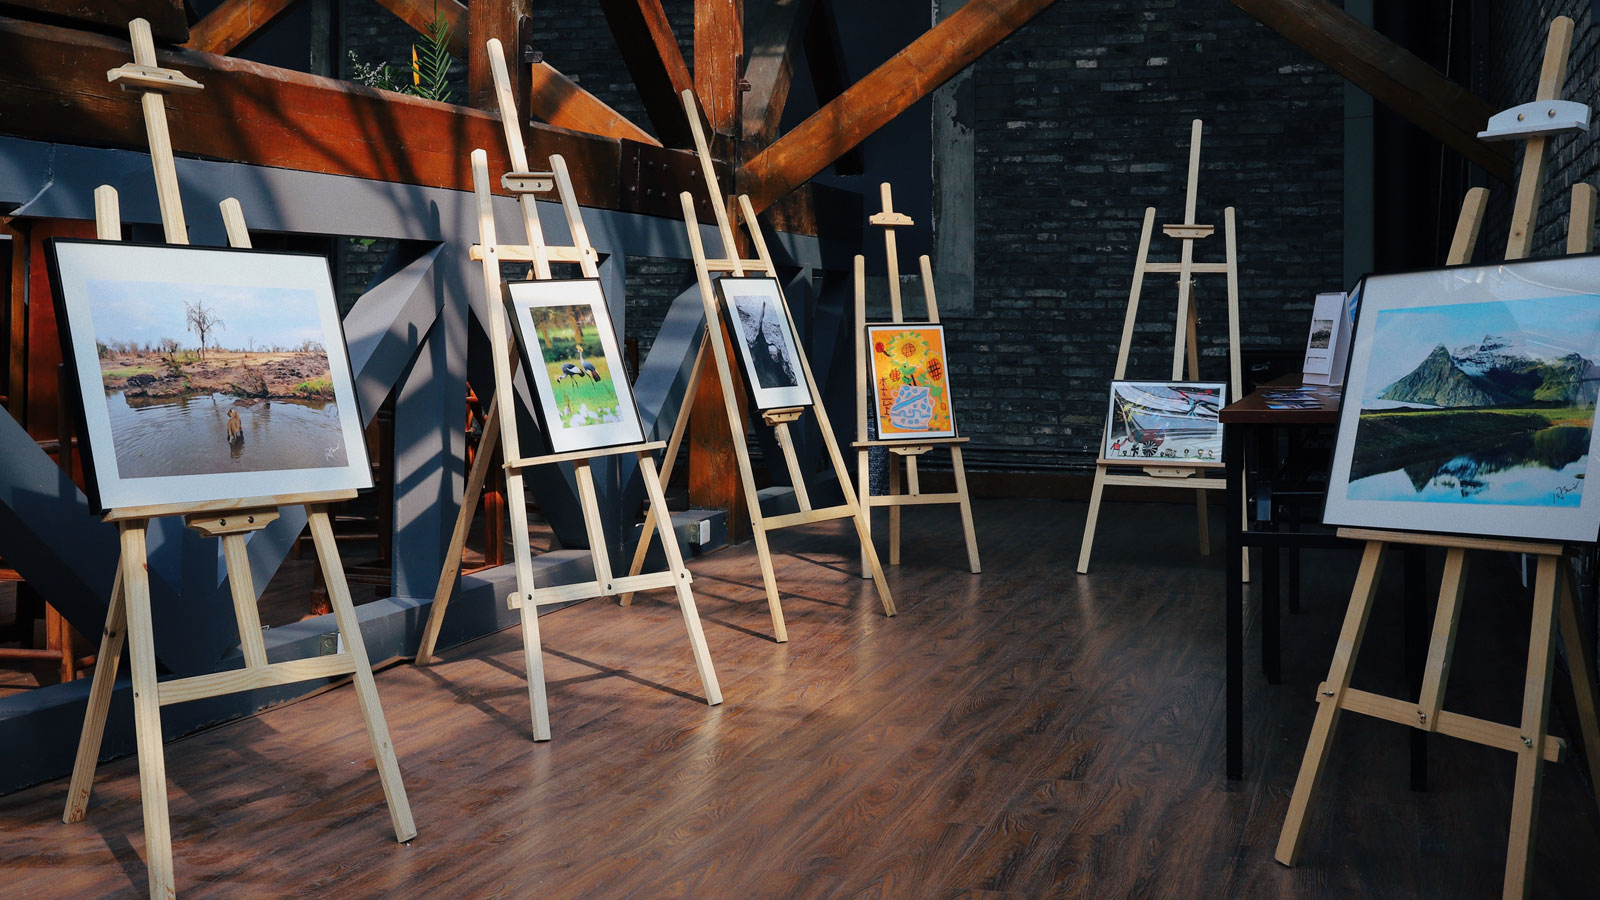 Art gallery landscape photos and oil paintings placed on easels